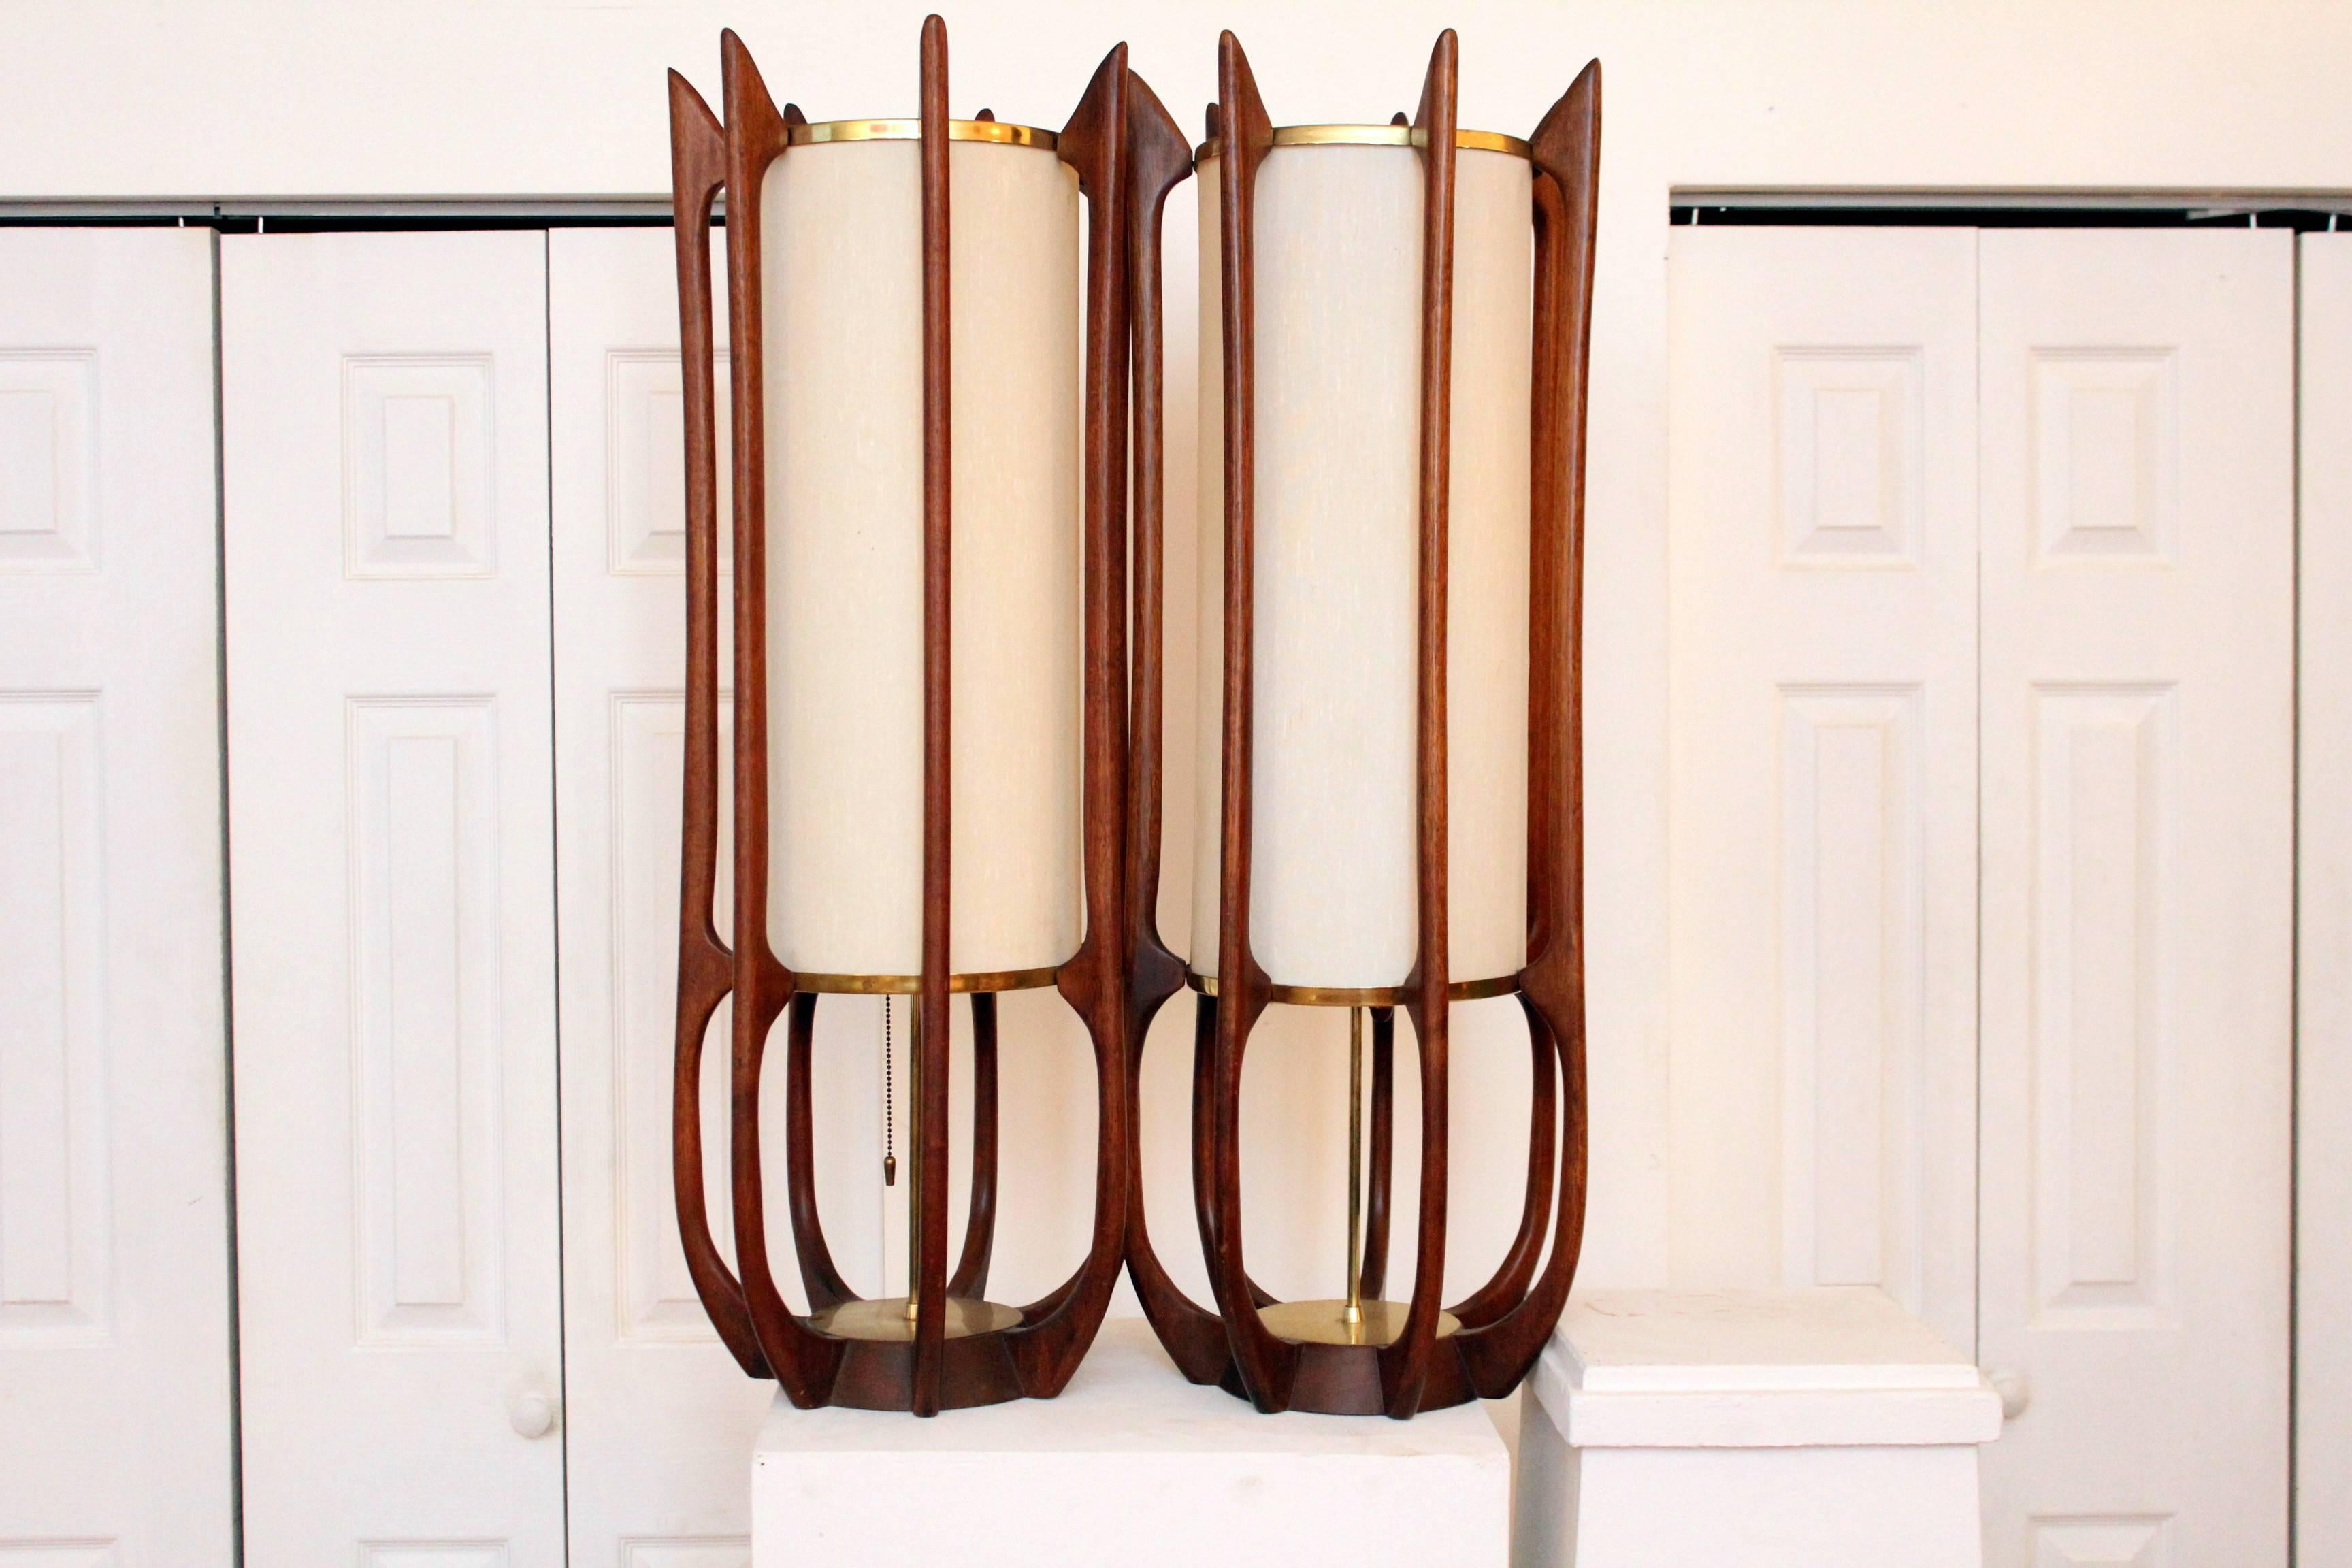 Mid-Century Modern Modeline sculptural lamps rarely available, this pair of Modeline table lamps boast tall fiberglass cylinder shades encased in the most beautiful patinated walnut ever. Unadorned circular brass plates add to the quiet beauty of